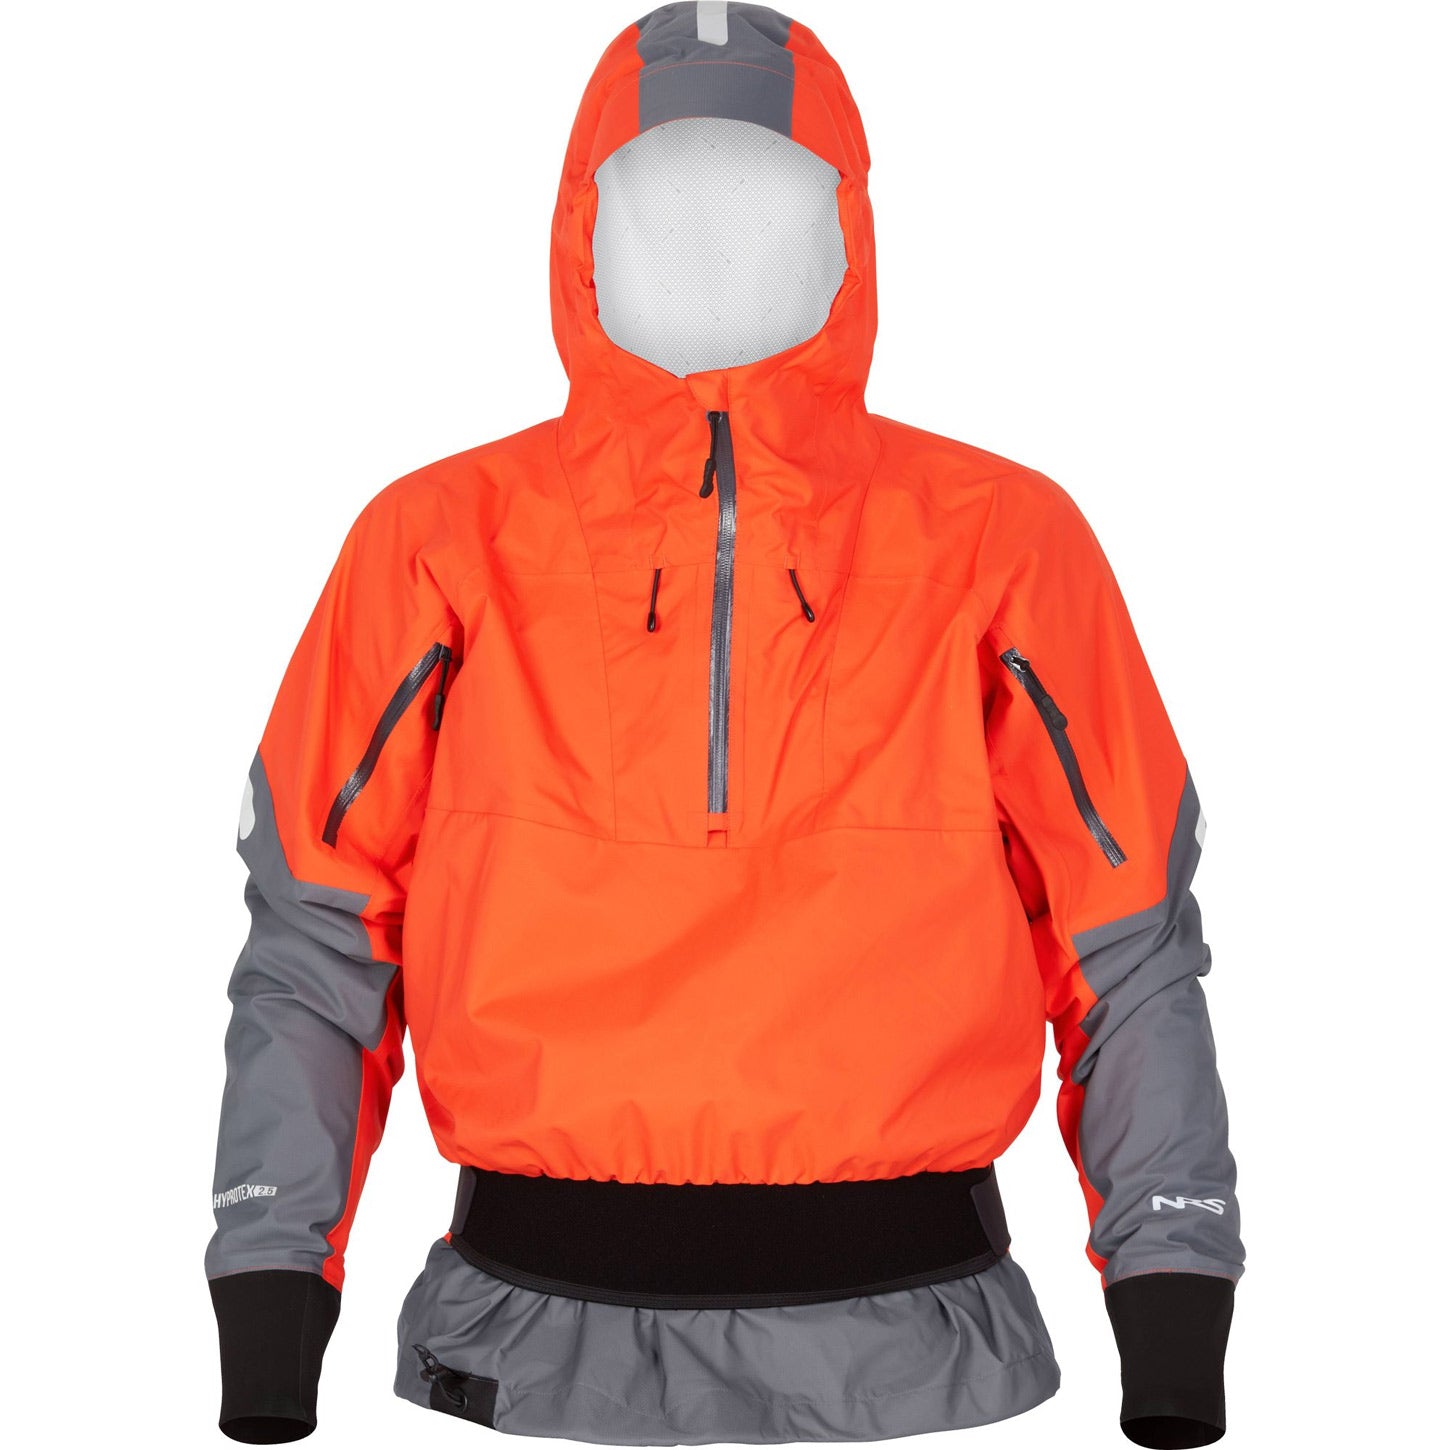 NRS RipTide jacket with hood and storm cuffs in Flare, available from Canoe Shops UK online or in-store